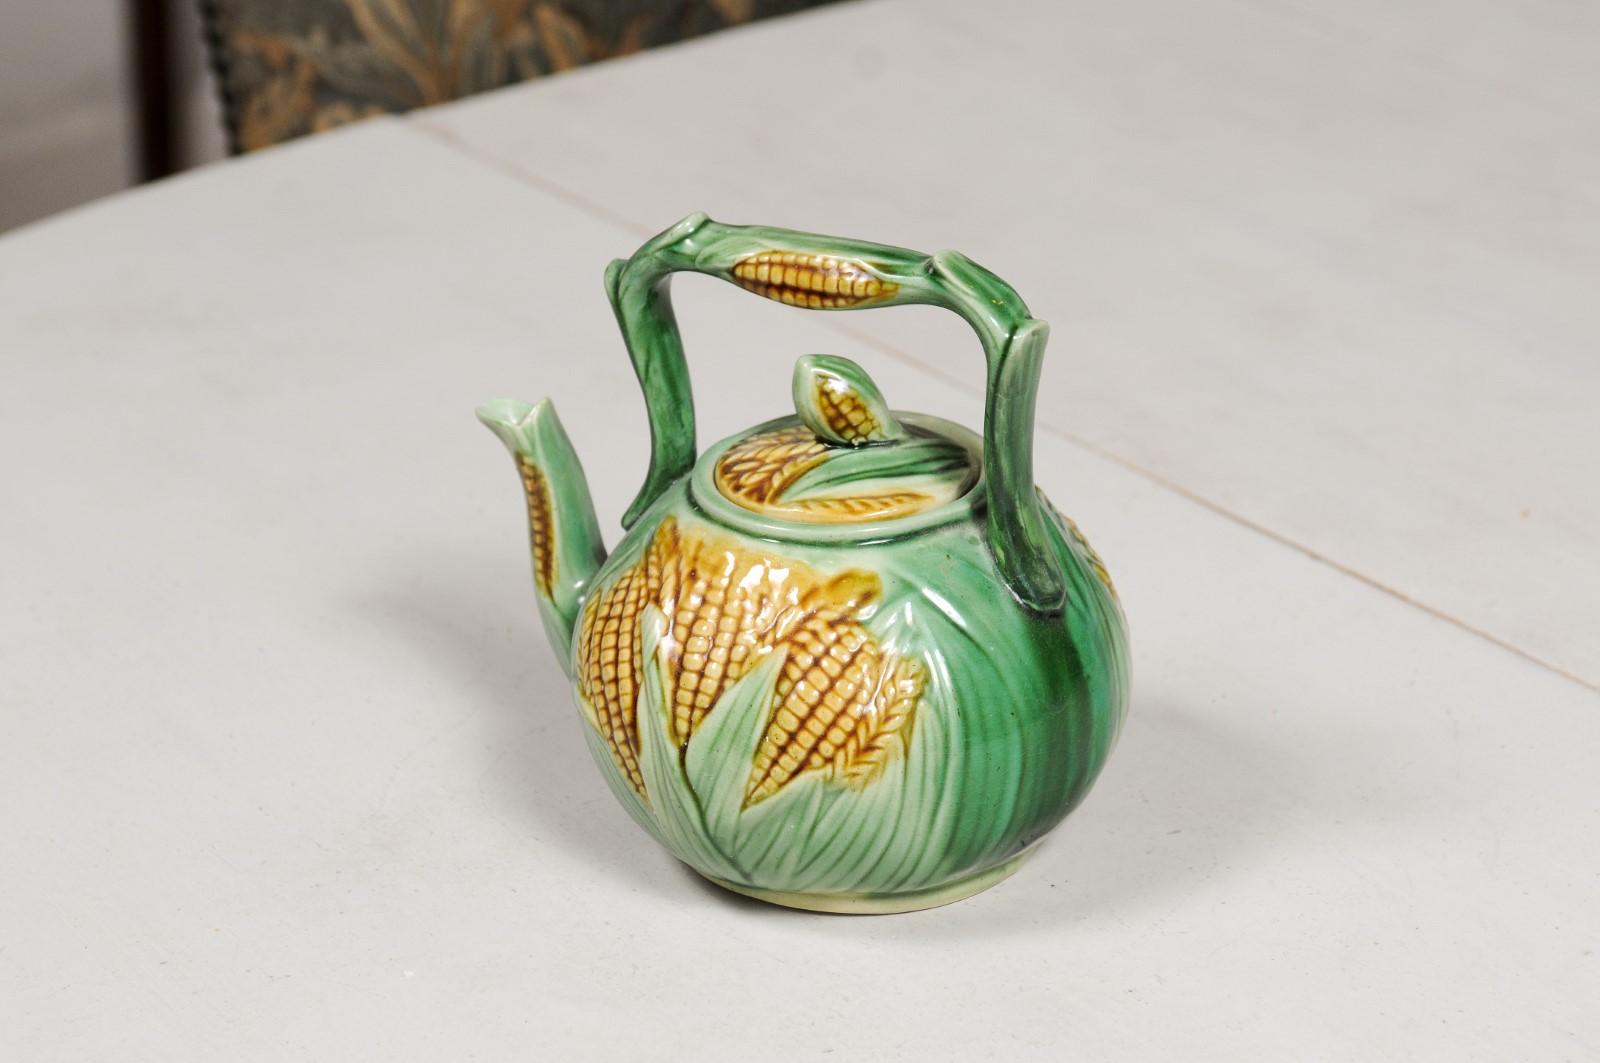 French 19th Century Majolica Lidded Teapot with Green Leaves and Corn Motifs 1